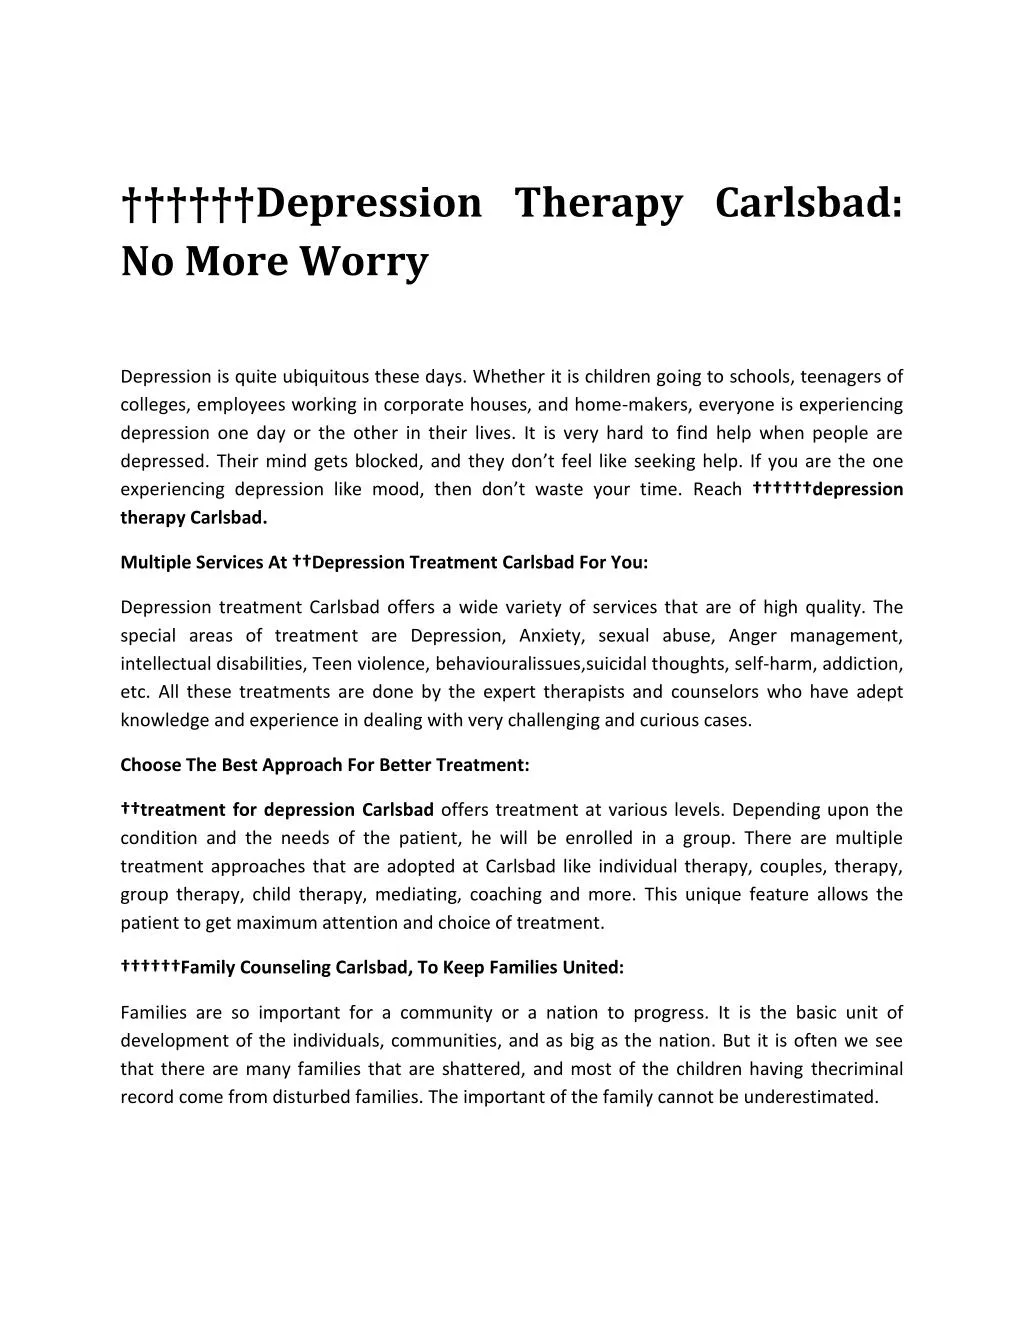 depression therapy carlsbad no more worry